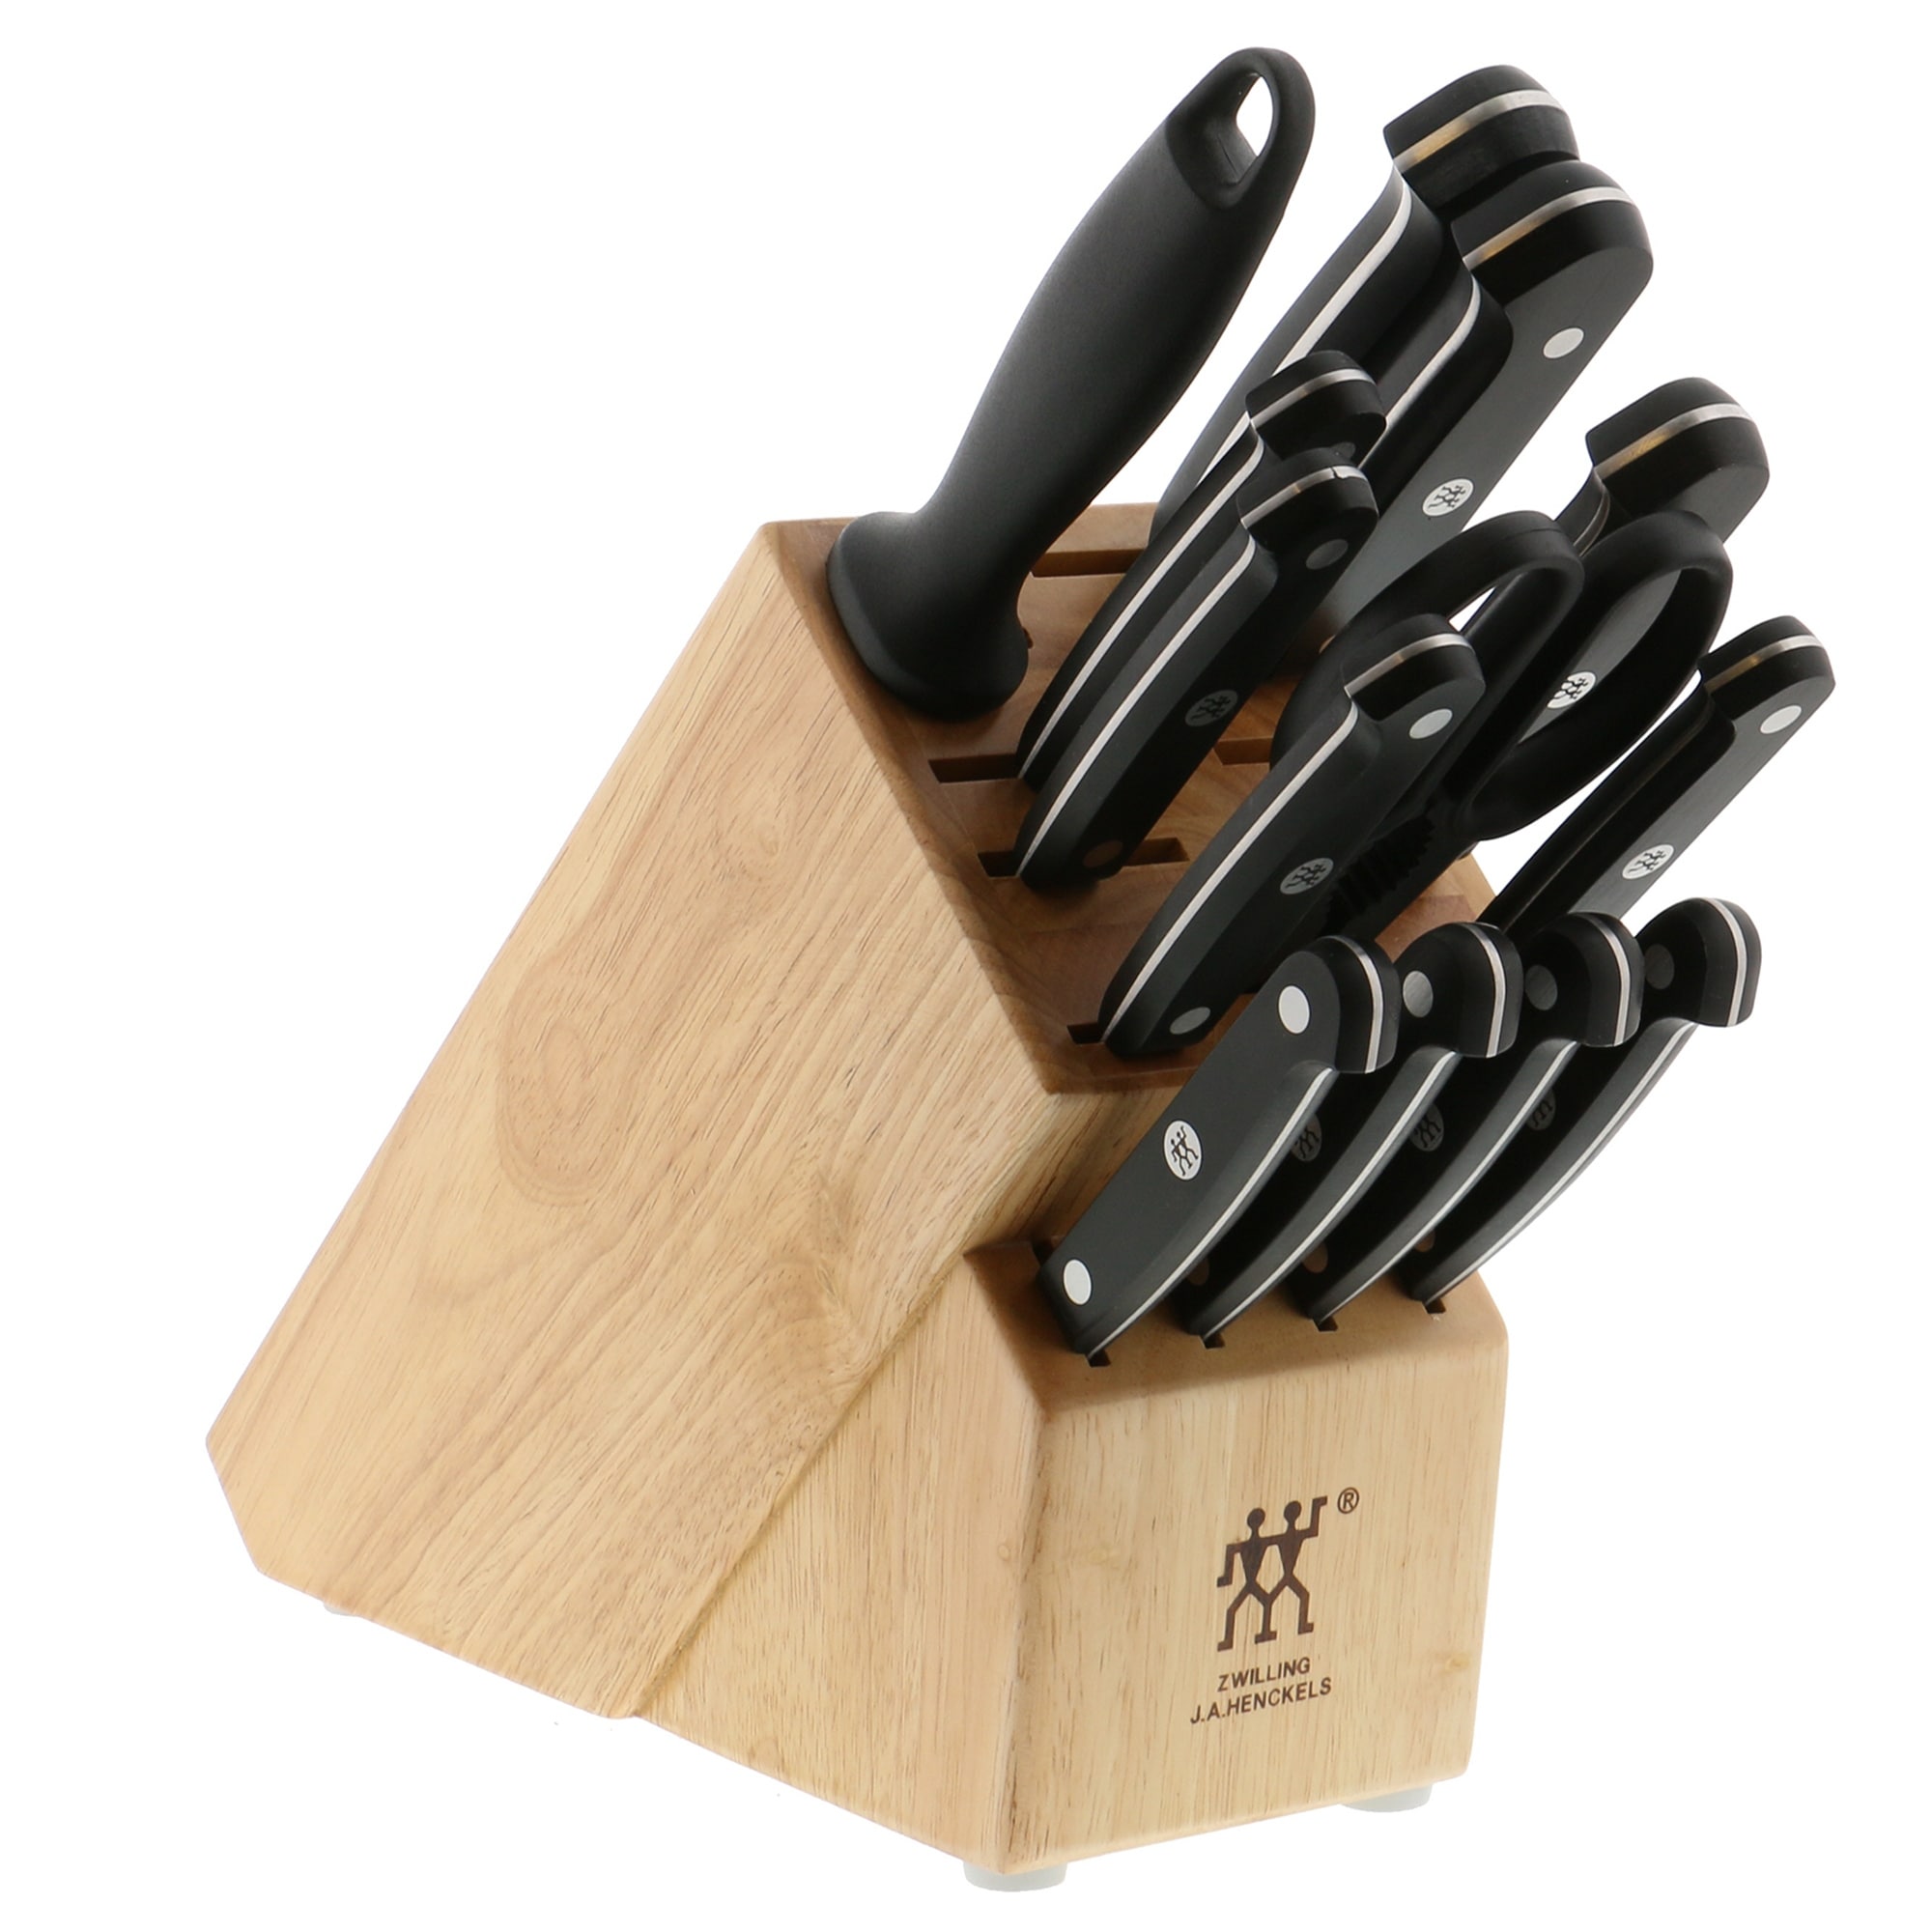 https://ak1.ostkcdn.com/images/products/is/images/direct/fff0dbad7223f740b212a07a3d9cd51d6710477b/ZWILLING-Gourmet-14-pc-Knife-Block-Set.jpg